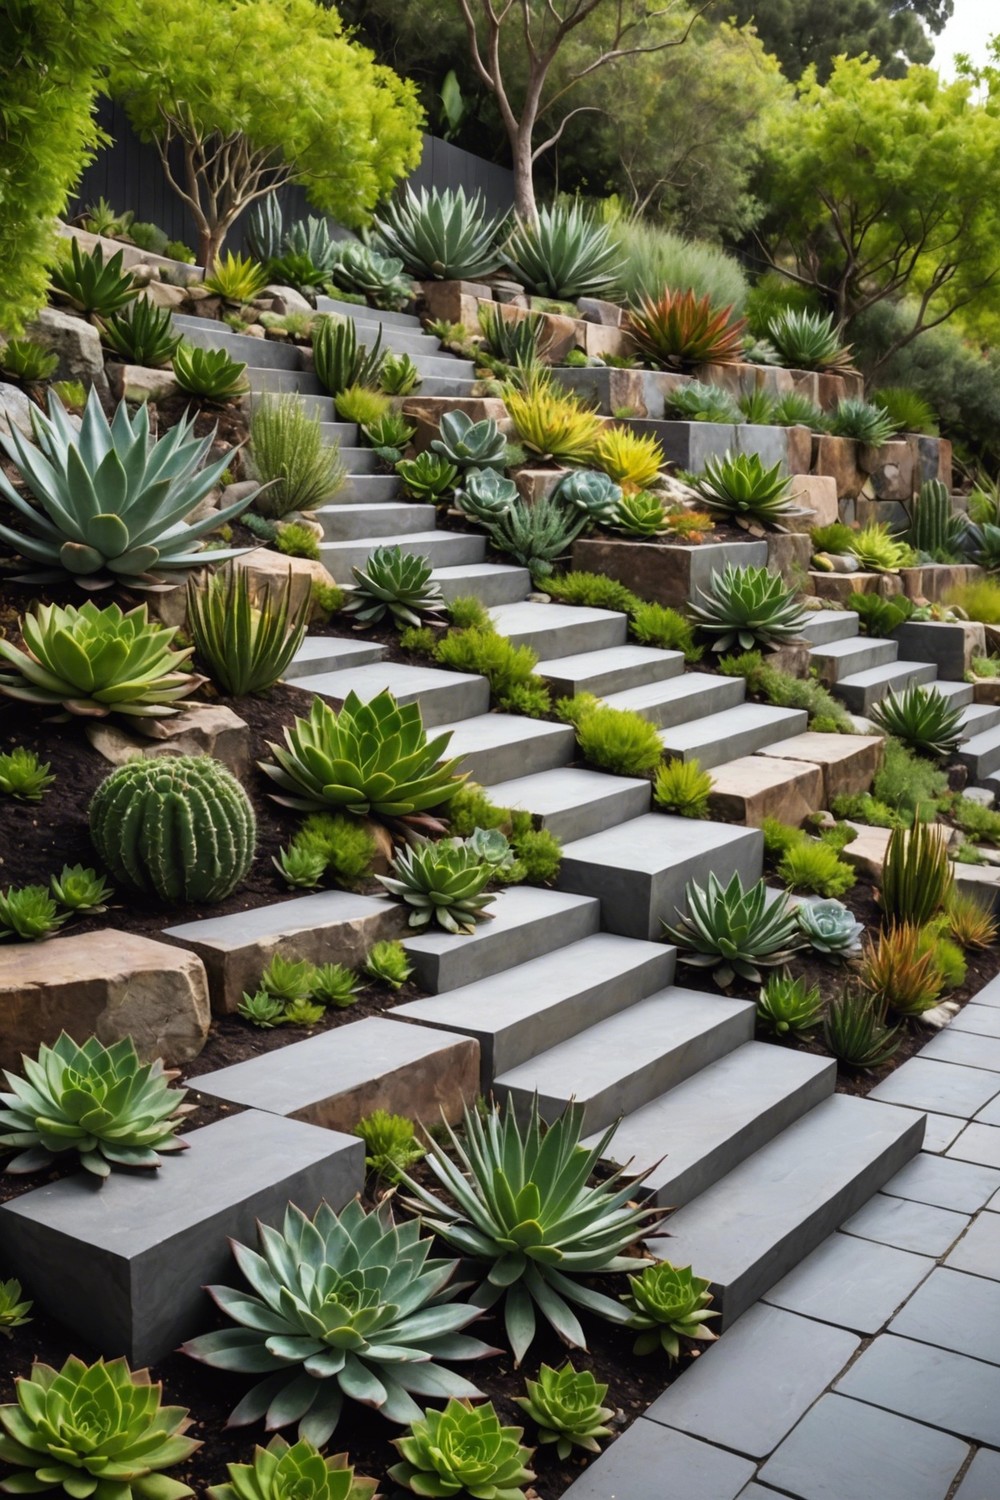 Succulent Terracing: A Modern Approach to Sloped Yards